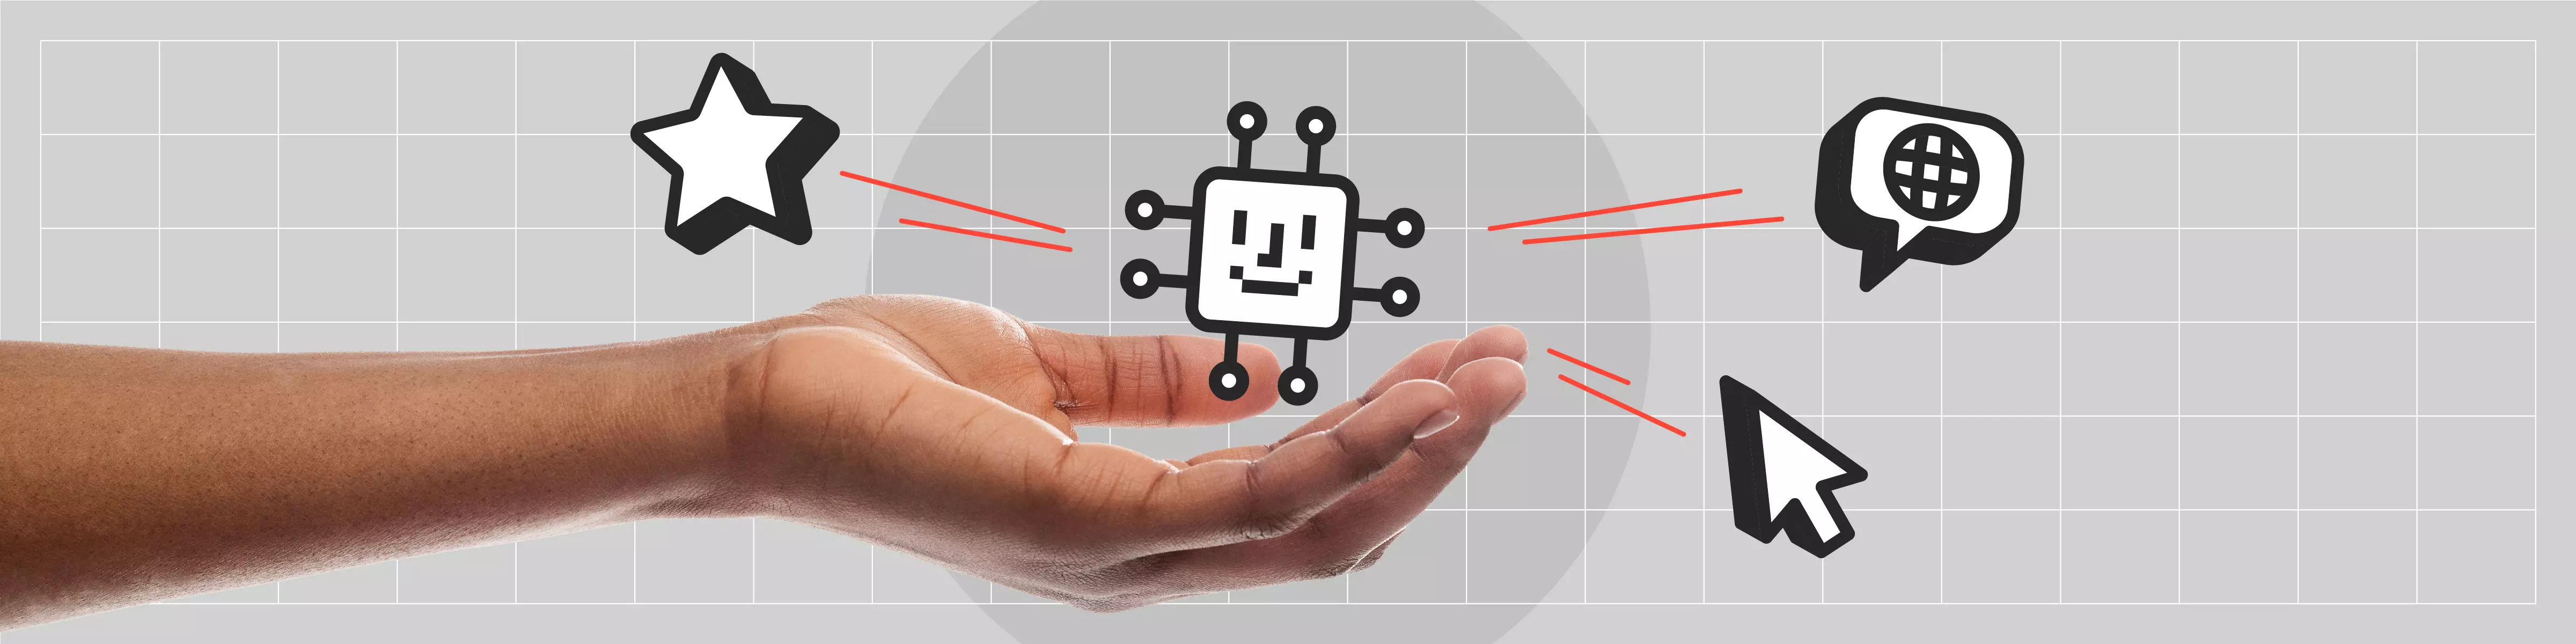 hand holding iconographic representation of artificial intelligent computer chip